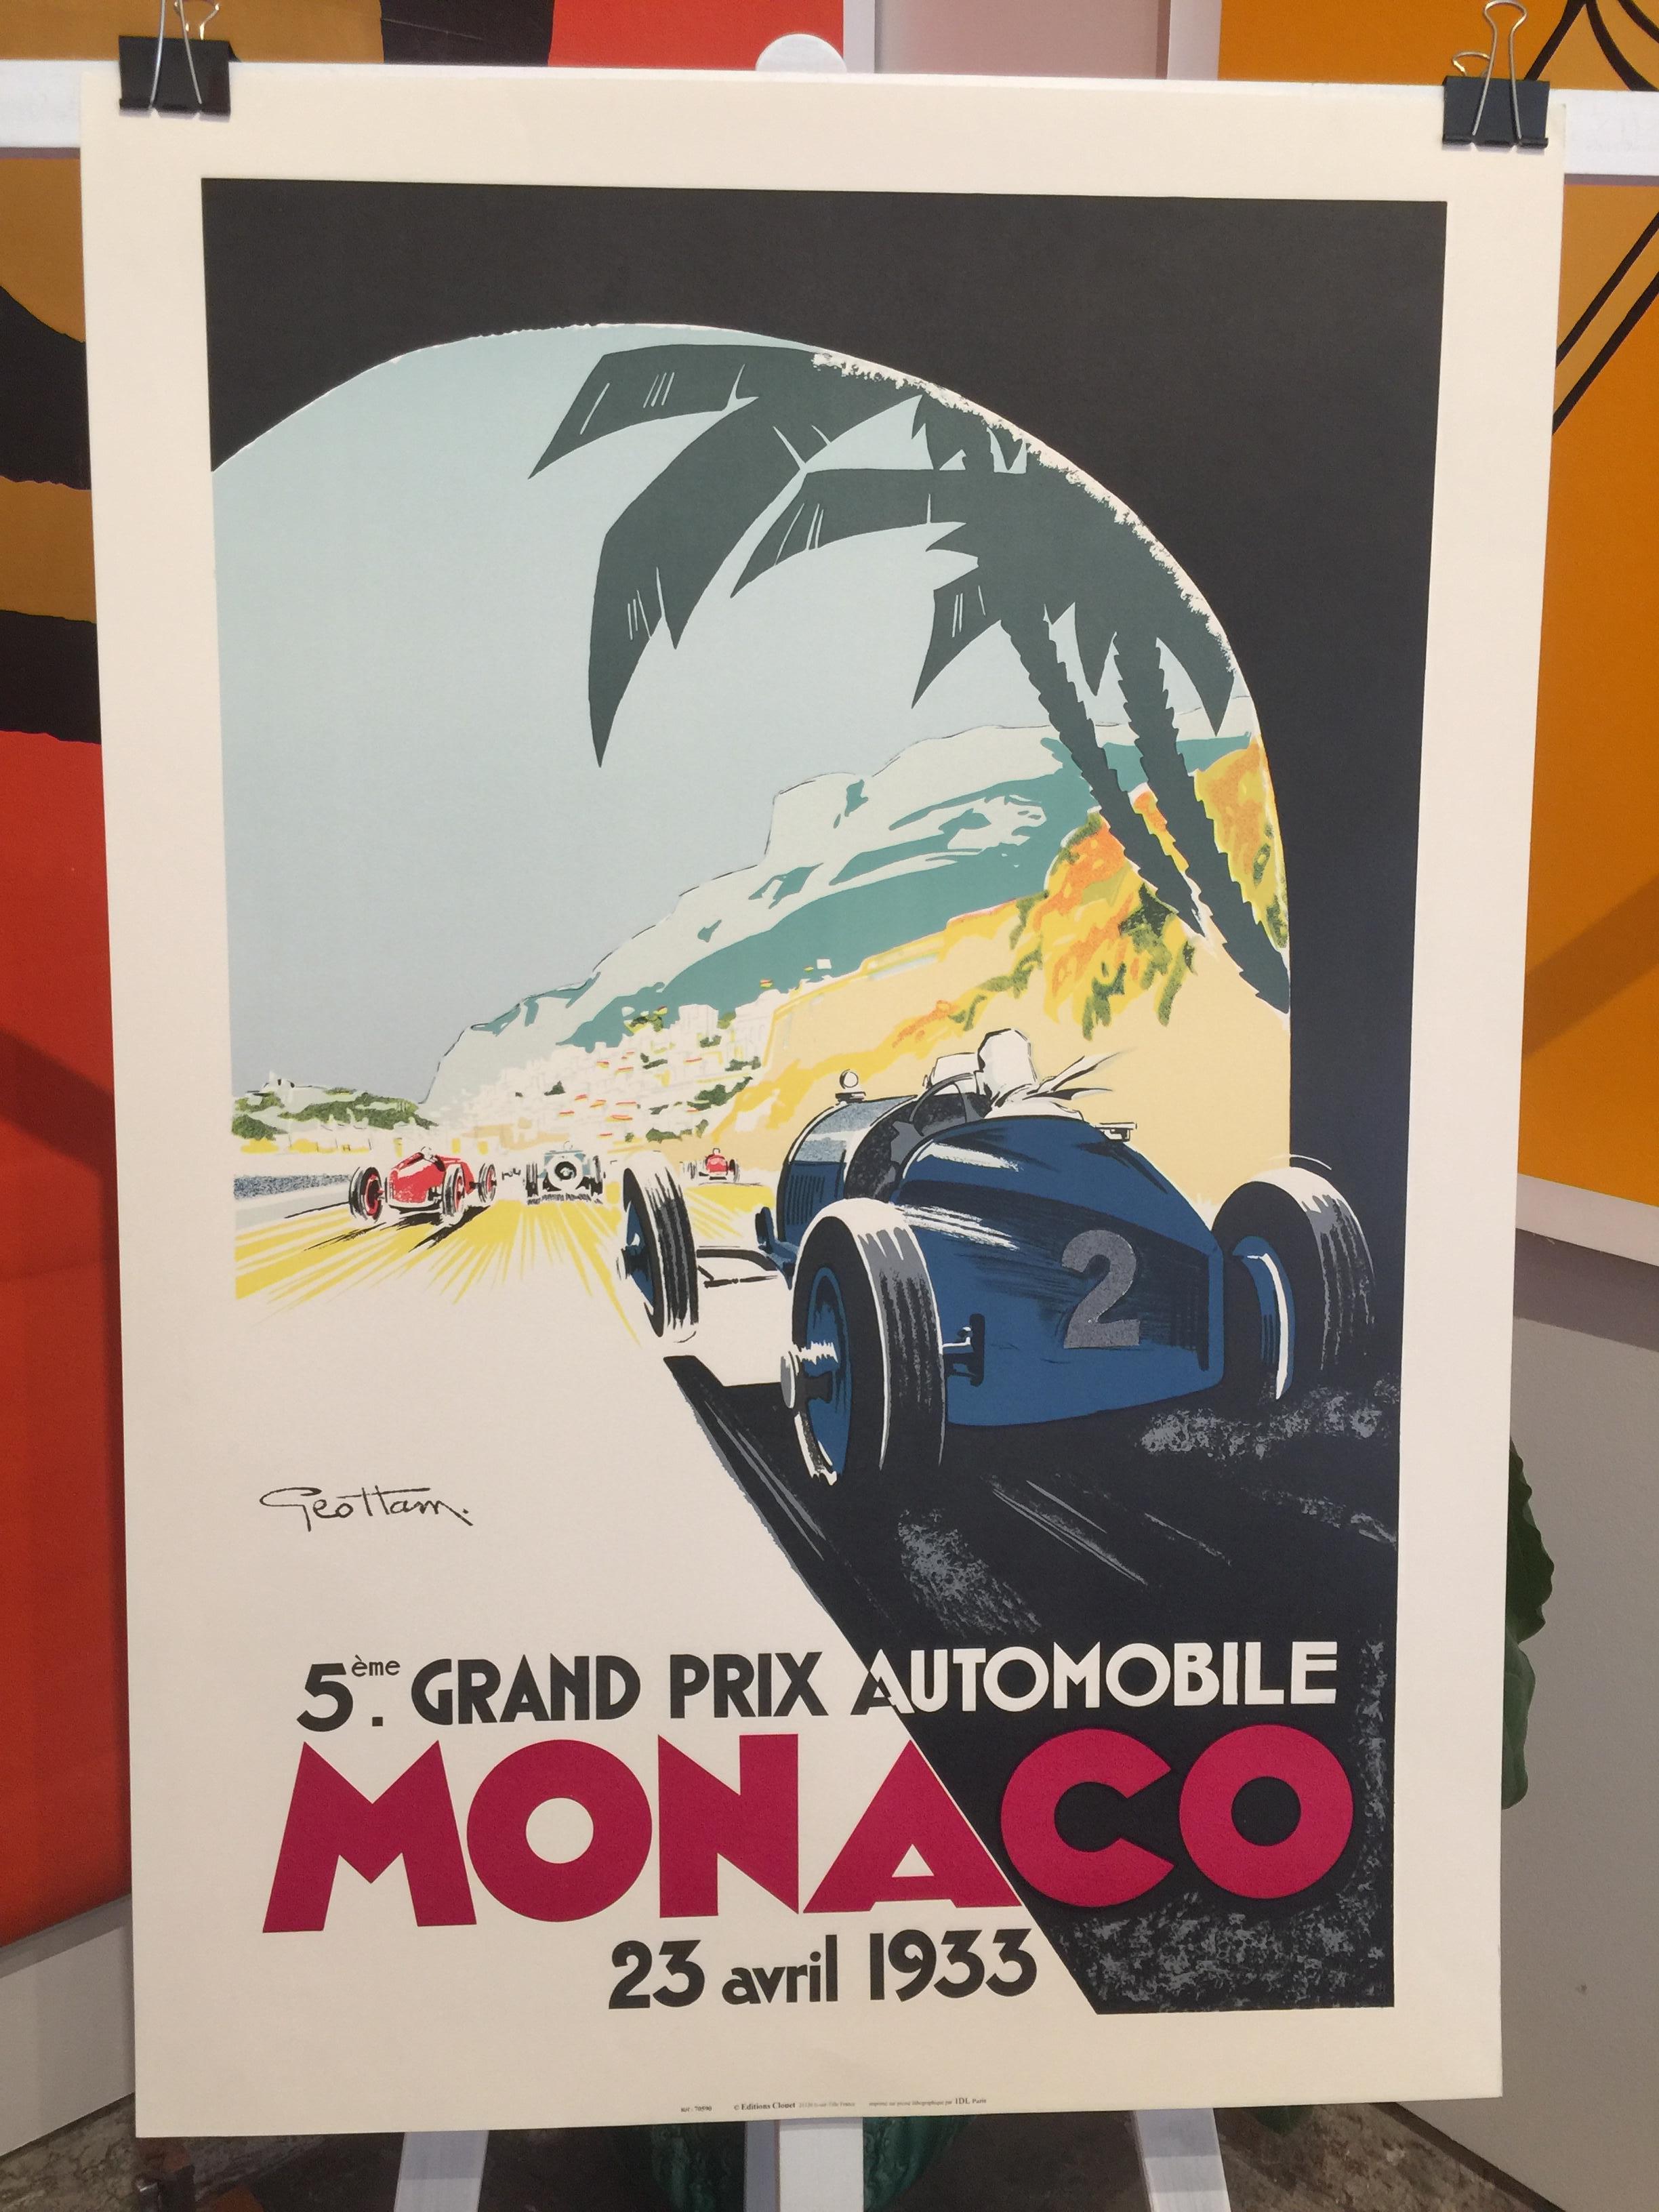 Authorized edition vintage Monaco Grand Prix car poster by Geo Ham, 1933

This poster is advertising the Grand Prix 

Printed by IDL Paris, circa 1980
Size: 27 x 39 inch.

   